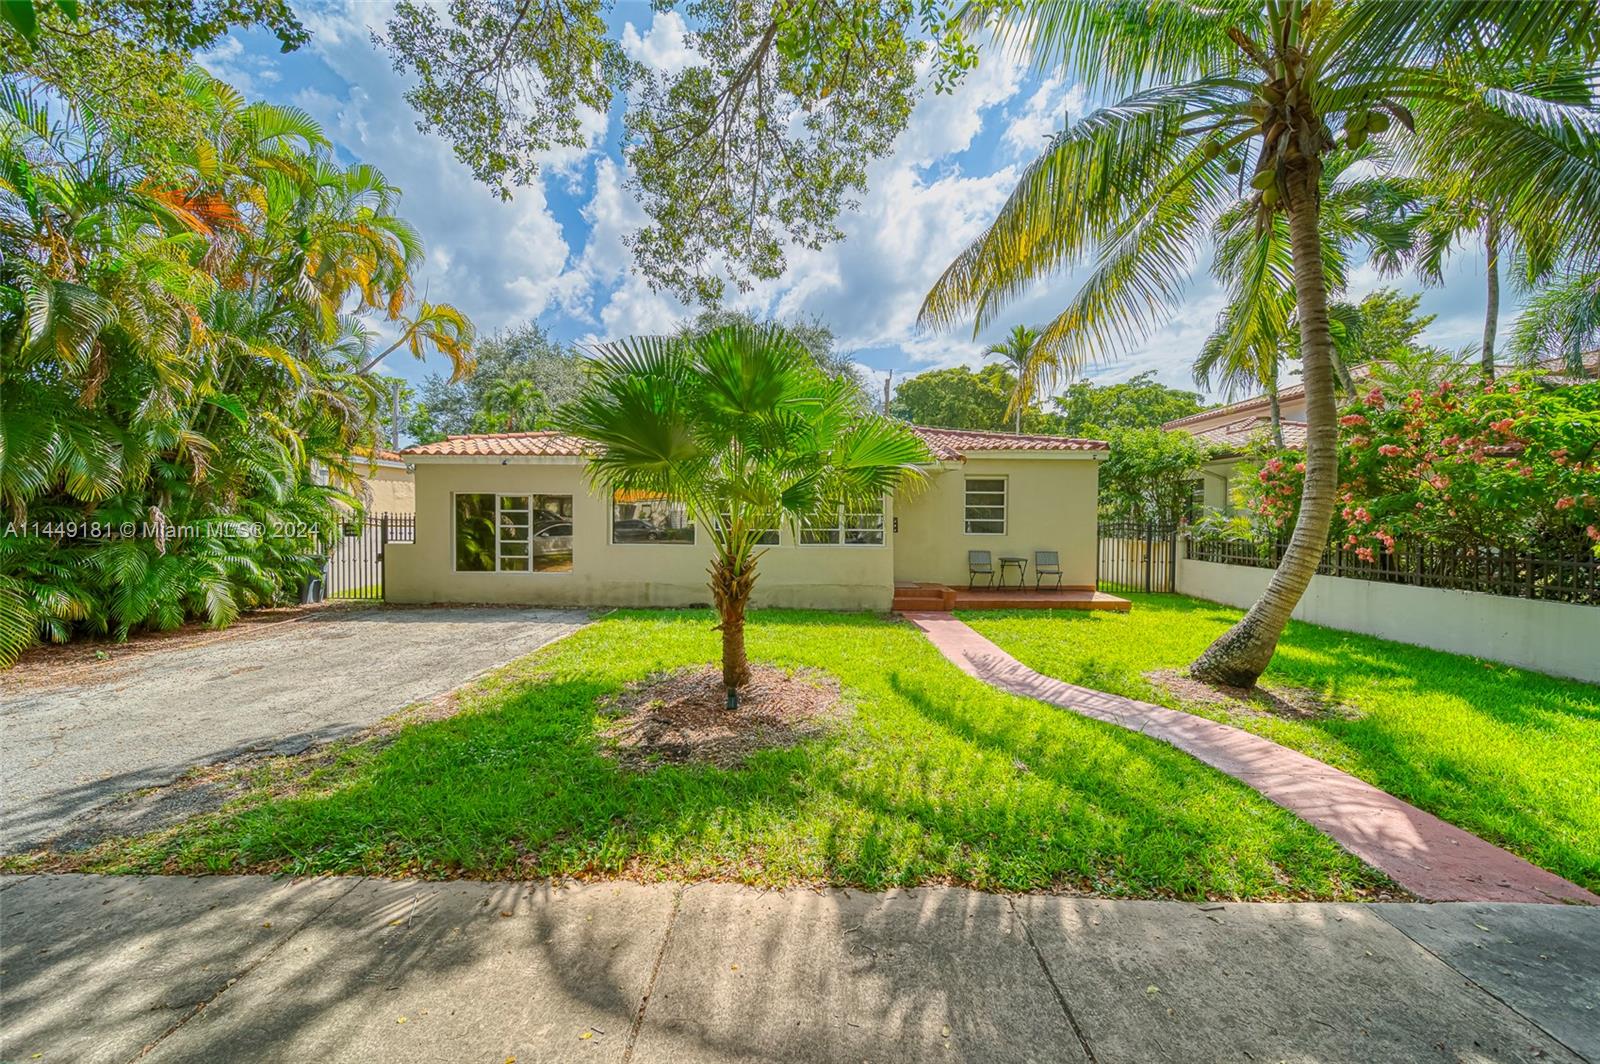 This charming Coral Gables residence, featuring 3 bedrooms and 2 bathrooms, is located on a serene tree-lined street just one block west of the esteemed Granada Blvd. Included in this offering are architectural plans for an approximately 1000 sqft addition. Whether you want to move in as is or design your dream home, this single-family property offers flexibility. The private fenced backyard is perfect for outdoor gatherings and potential pool installation. Additionally, its proximity to Downtown Coral Gables, the Miracle Mile, Biltmore and Granada golf courses, pet-friendly areas, dog parks, tennis courts, upscale boutiques, cafes, entertainment venues, and fine dining establishments make this location truly exceptional!